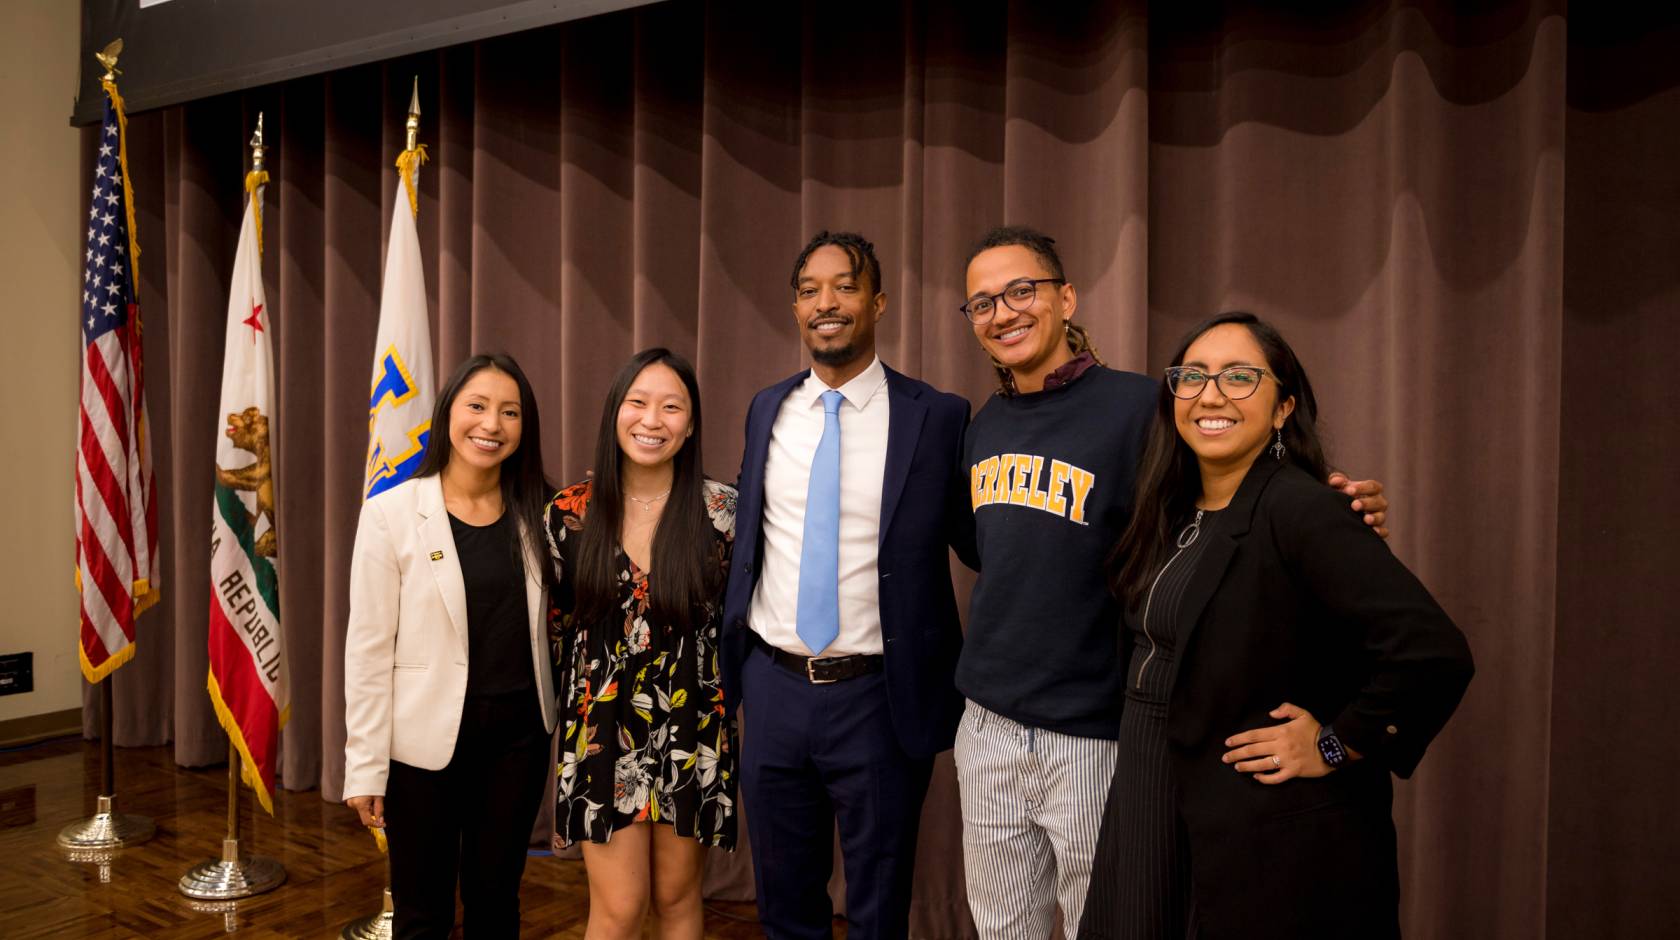 From left to right, current Student Regent Marlenee Blas Pedral, Mary Tran, Student Regent-designate Merhawi Tesfai, William Carter and Deniss Martinez posing for photo in a conference room